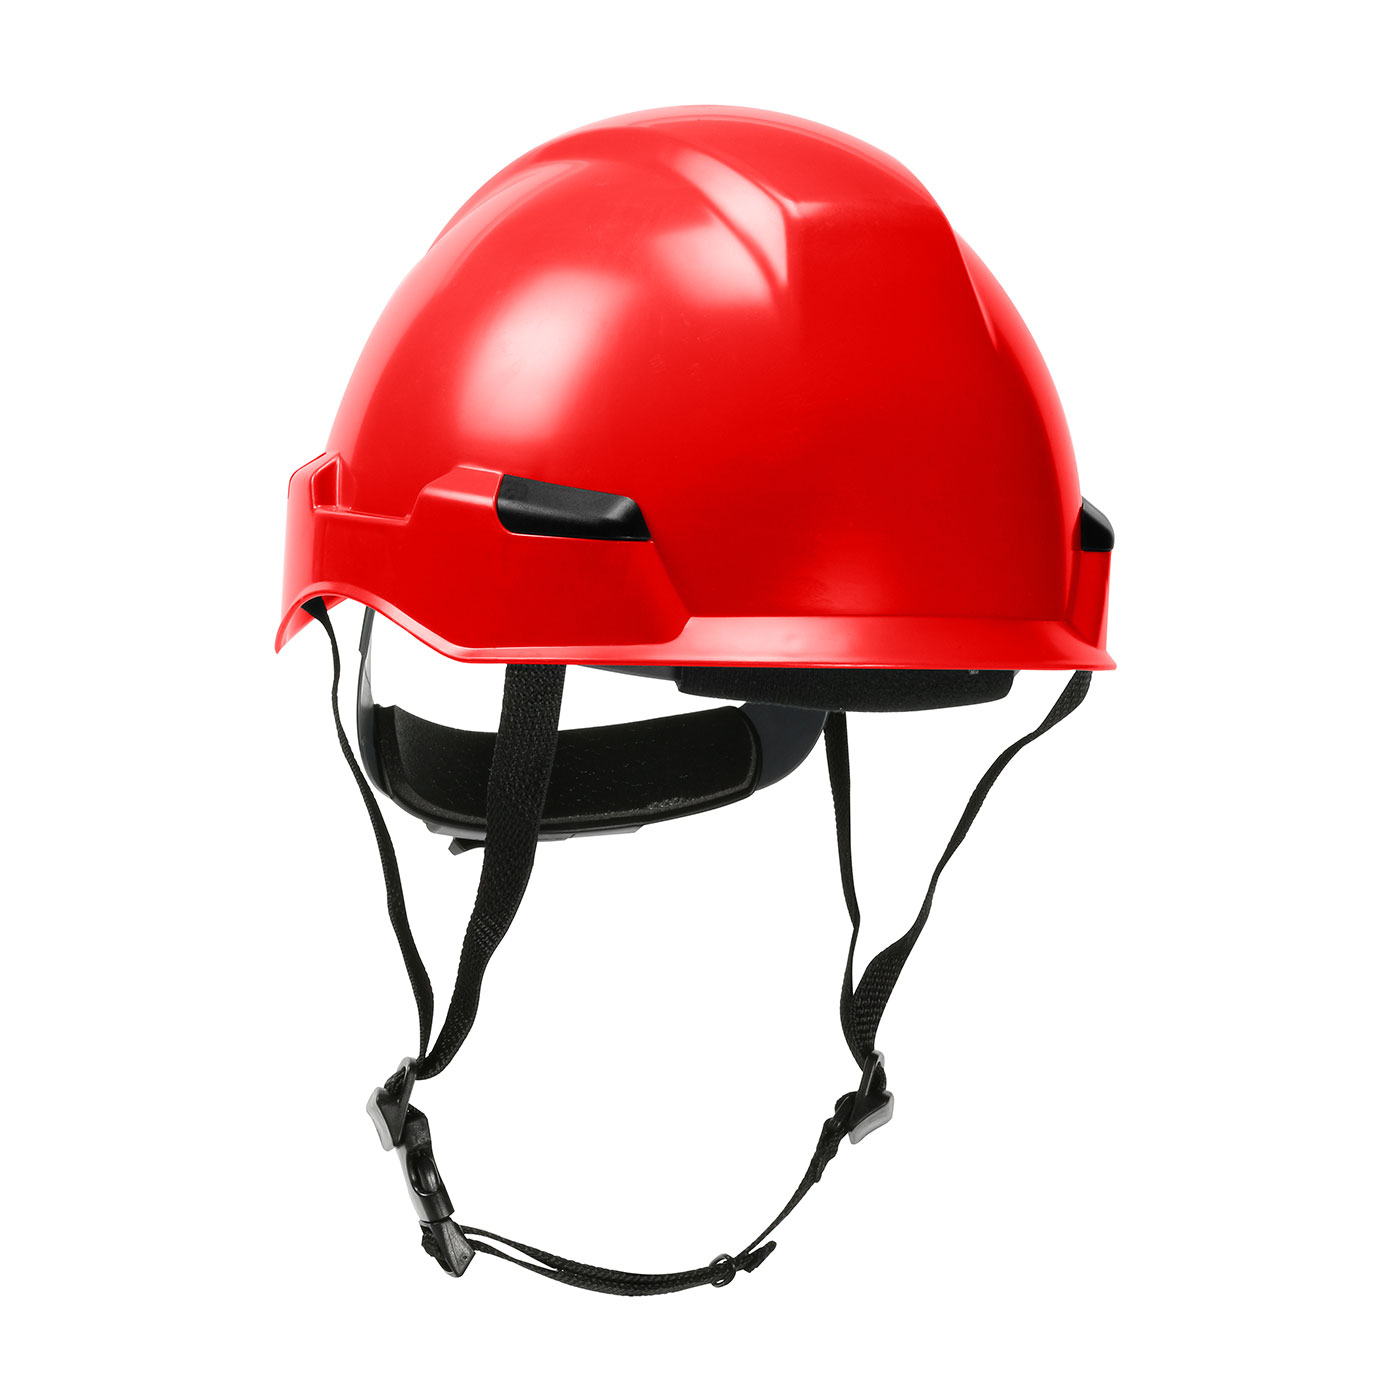 280-HP142R PIP® Dynamic Rocky™ Industrial Climbing Helmet with Polycarbonate / ABS Shell, Hi-Density Foam Impact Liner, Nylon Suspension, Wheel Ratchet Adjustment and 4-Point Chin Strap- Red